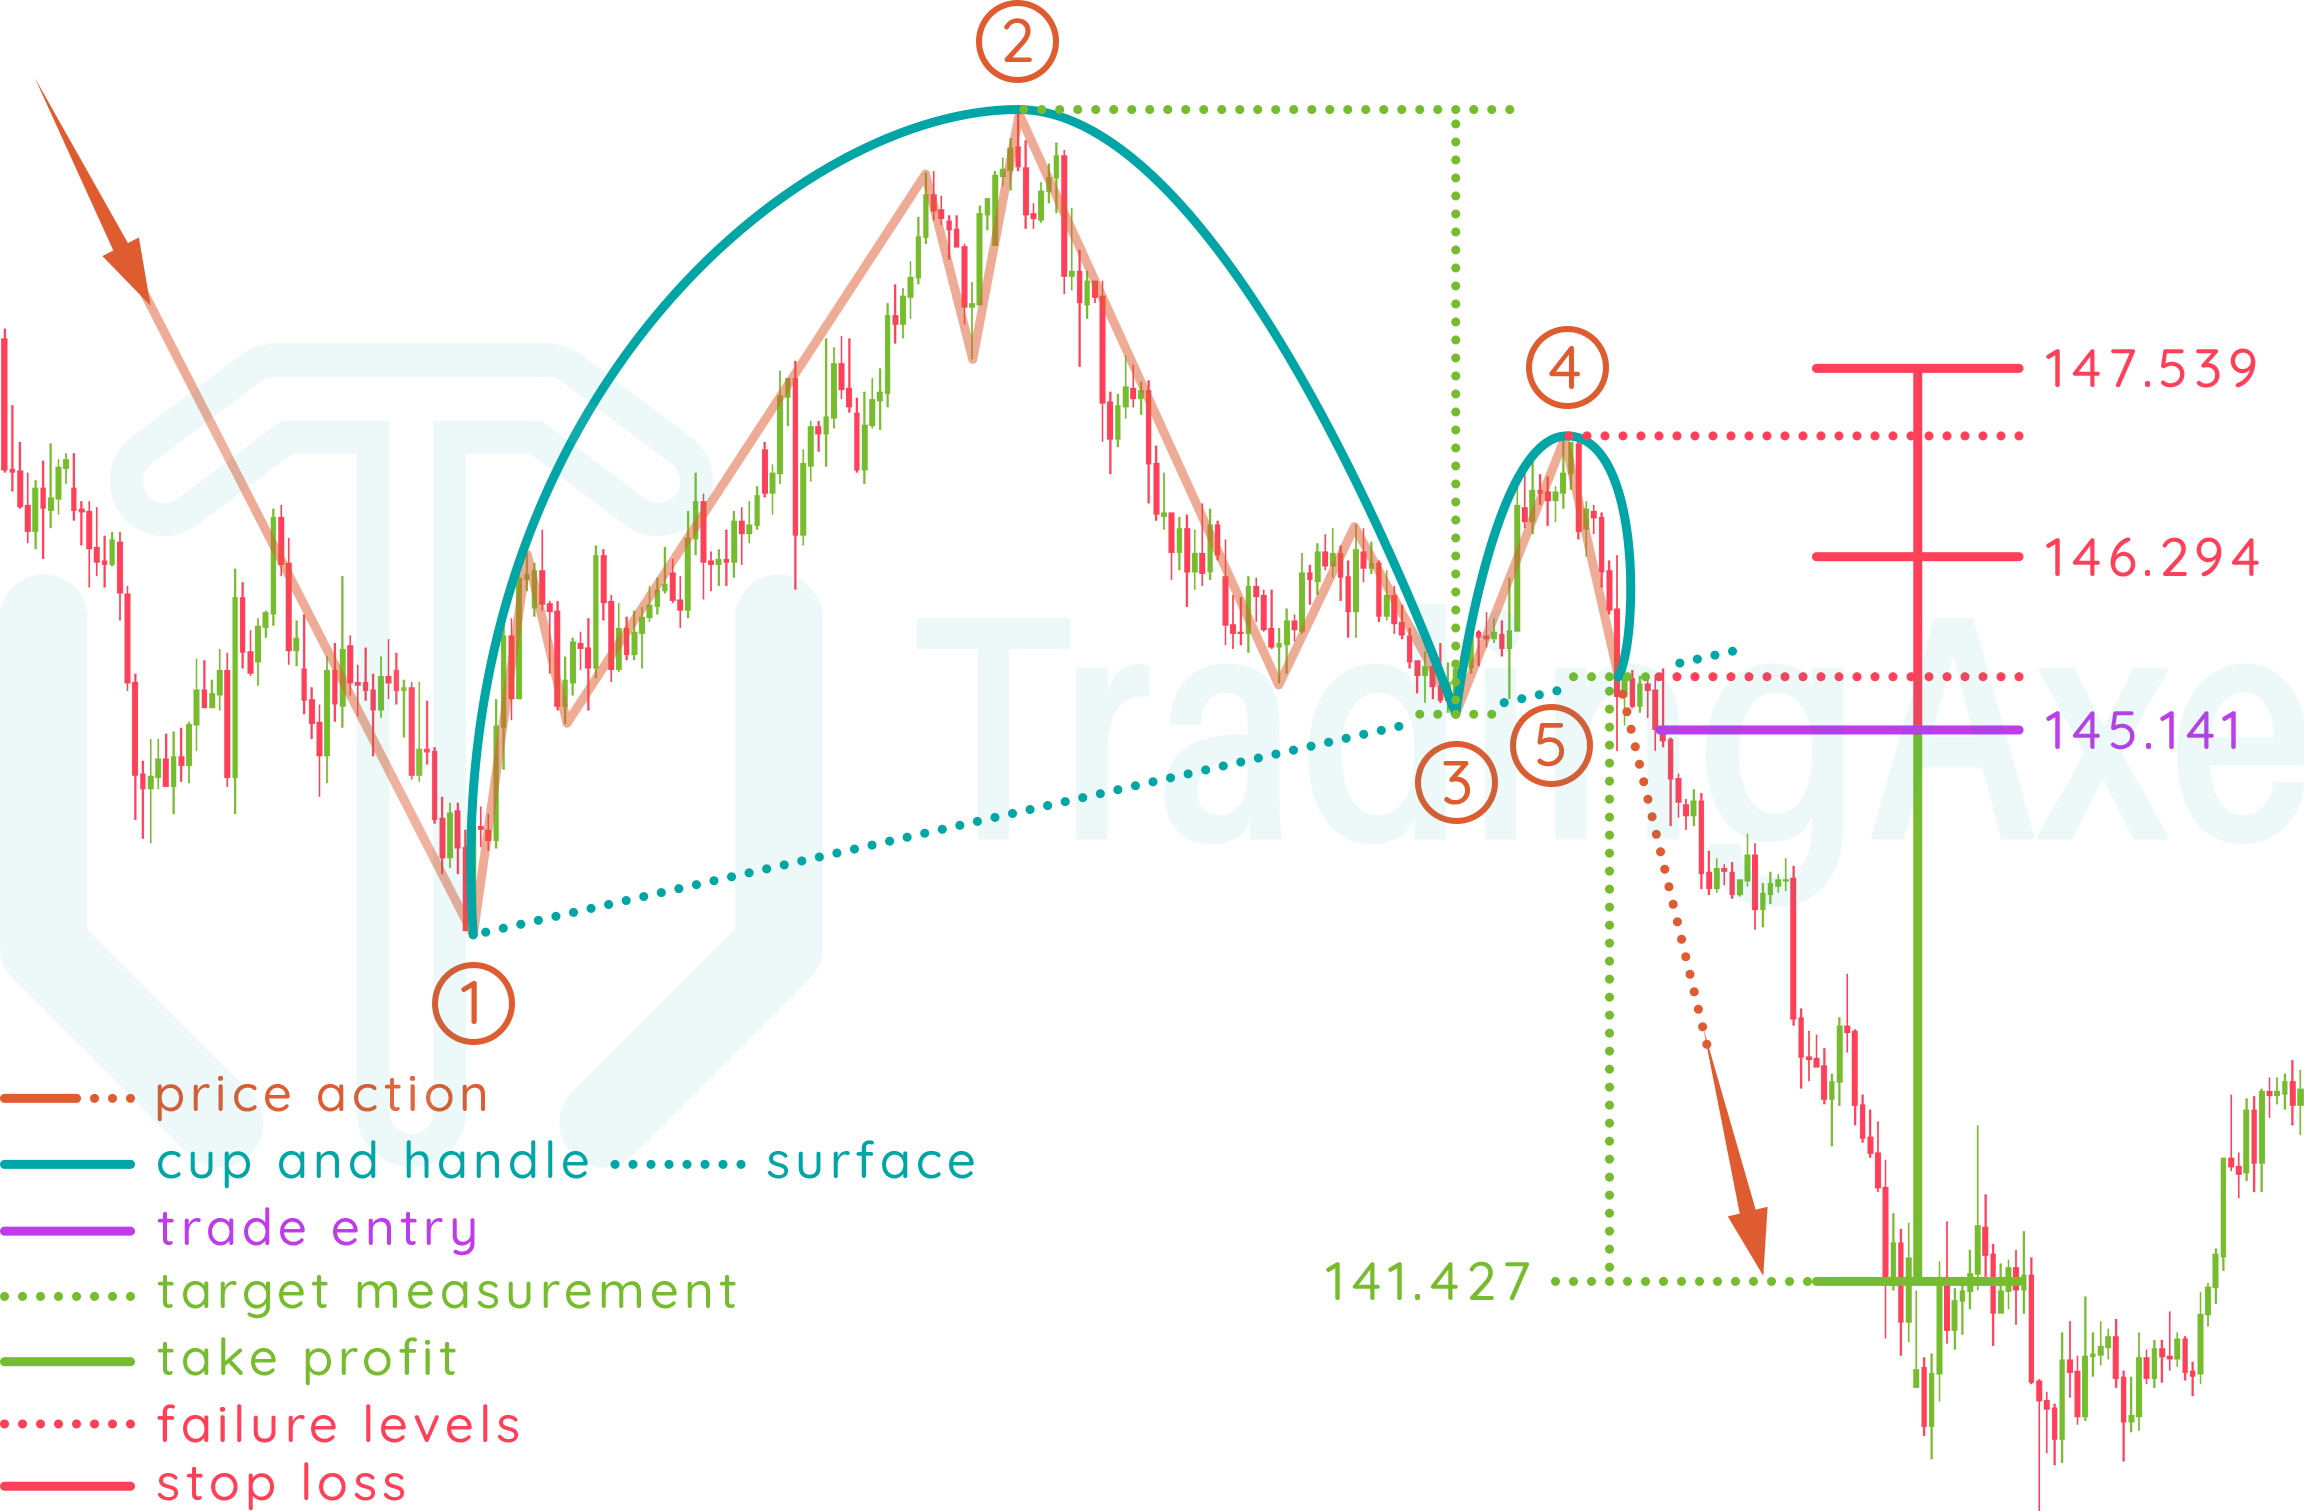 Inverted cup and handle real trading example